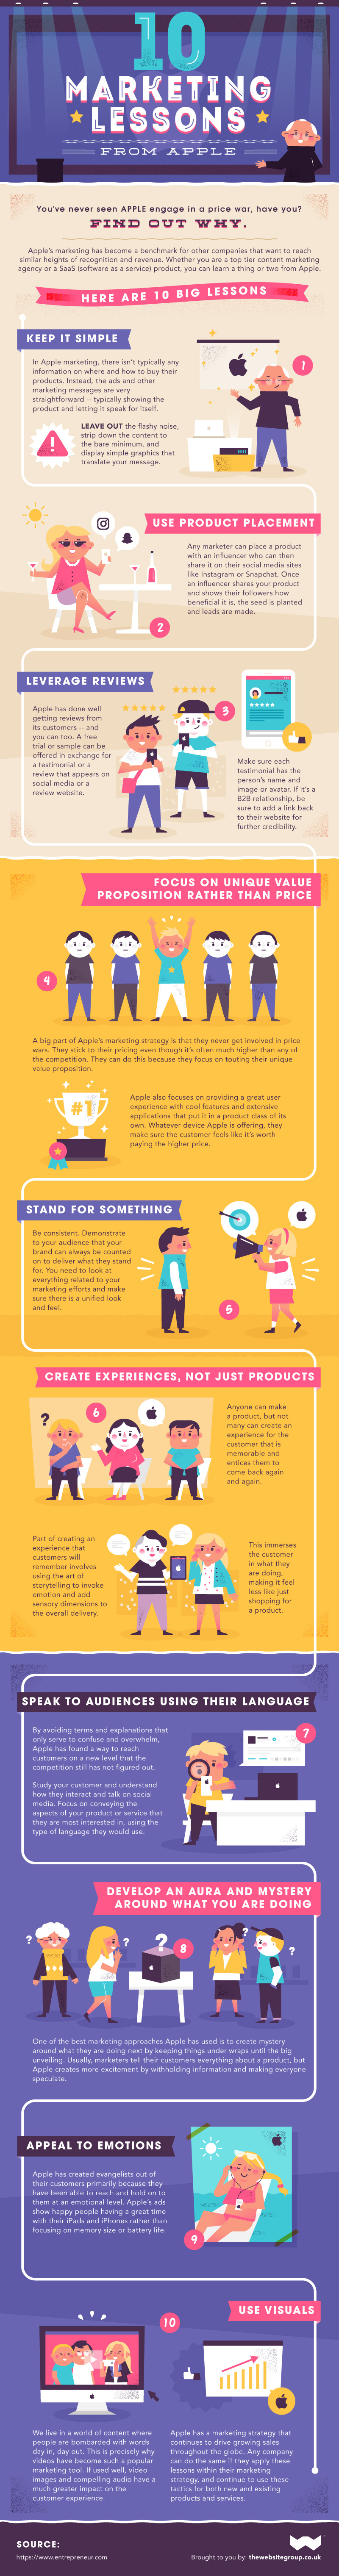 Infographic with ten marketing lessons from Apple